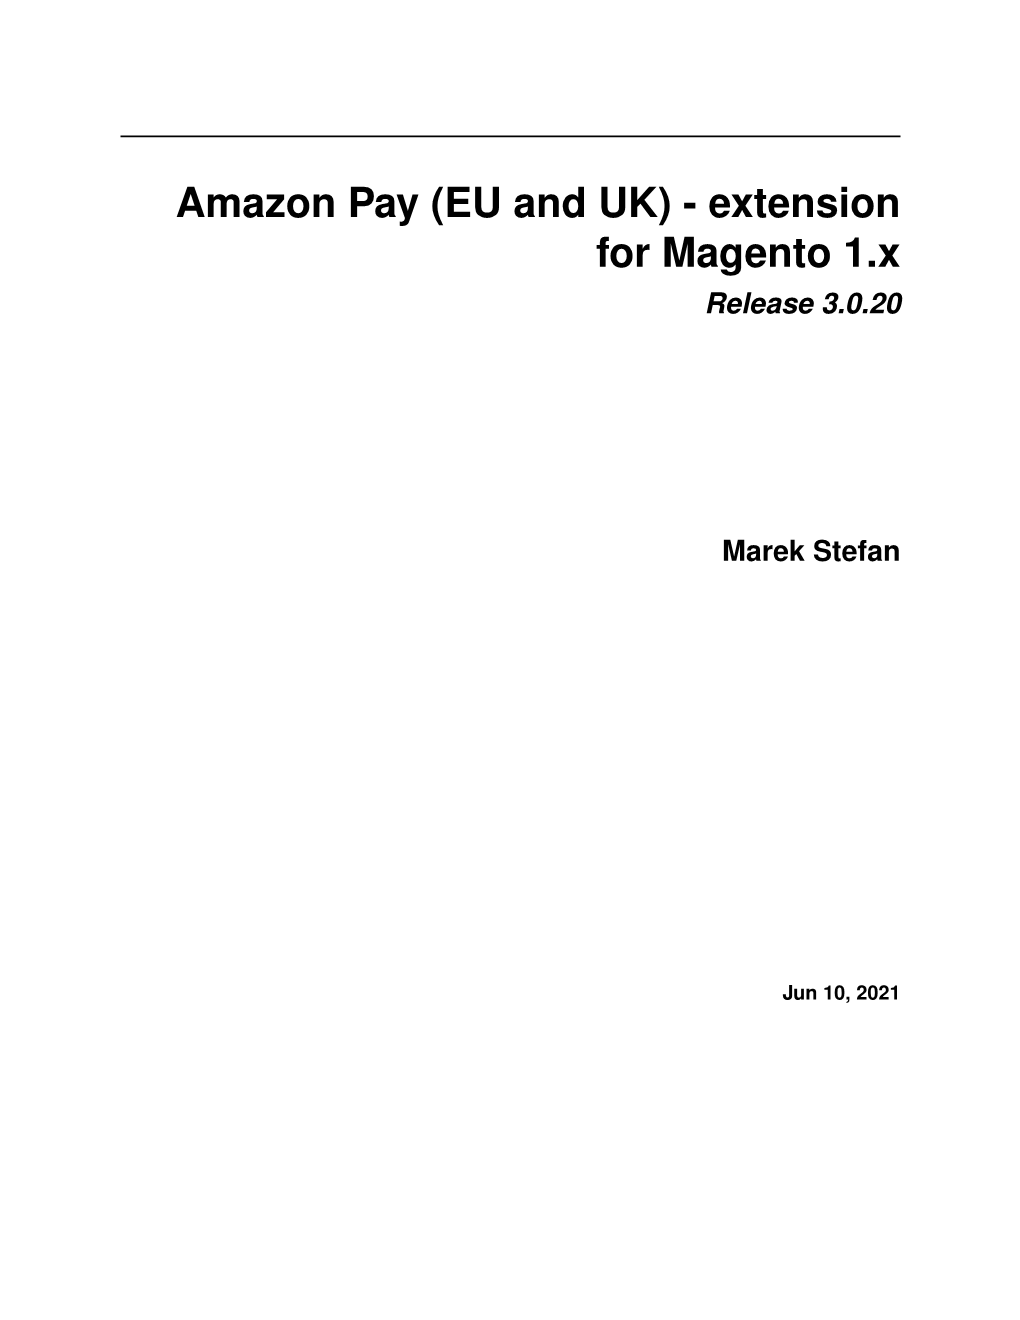 Amazon Pay (EU and UK) - Extension for Magento 1.X Release 3.0.20